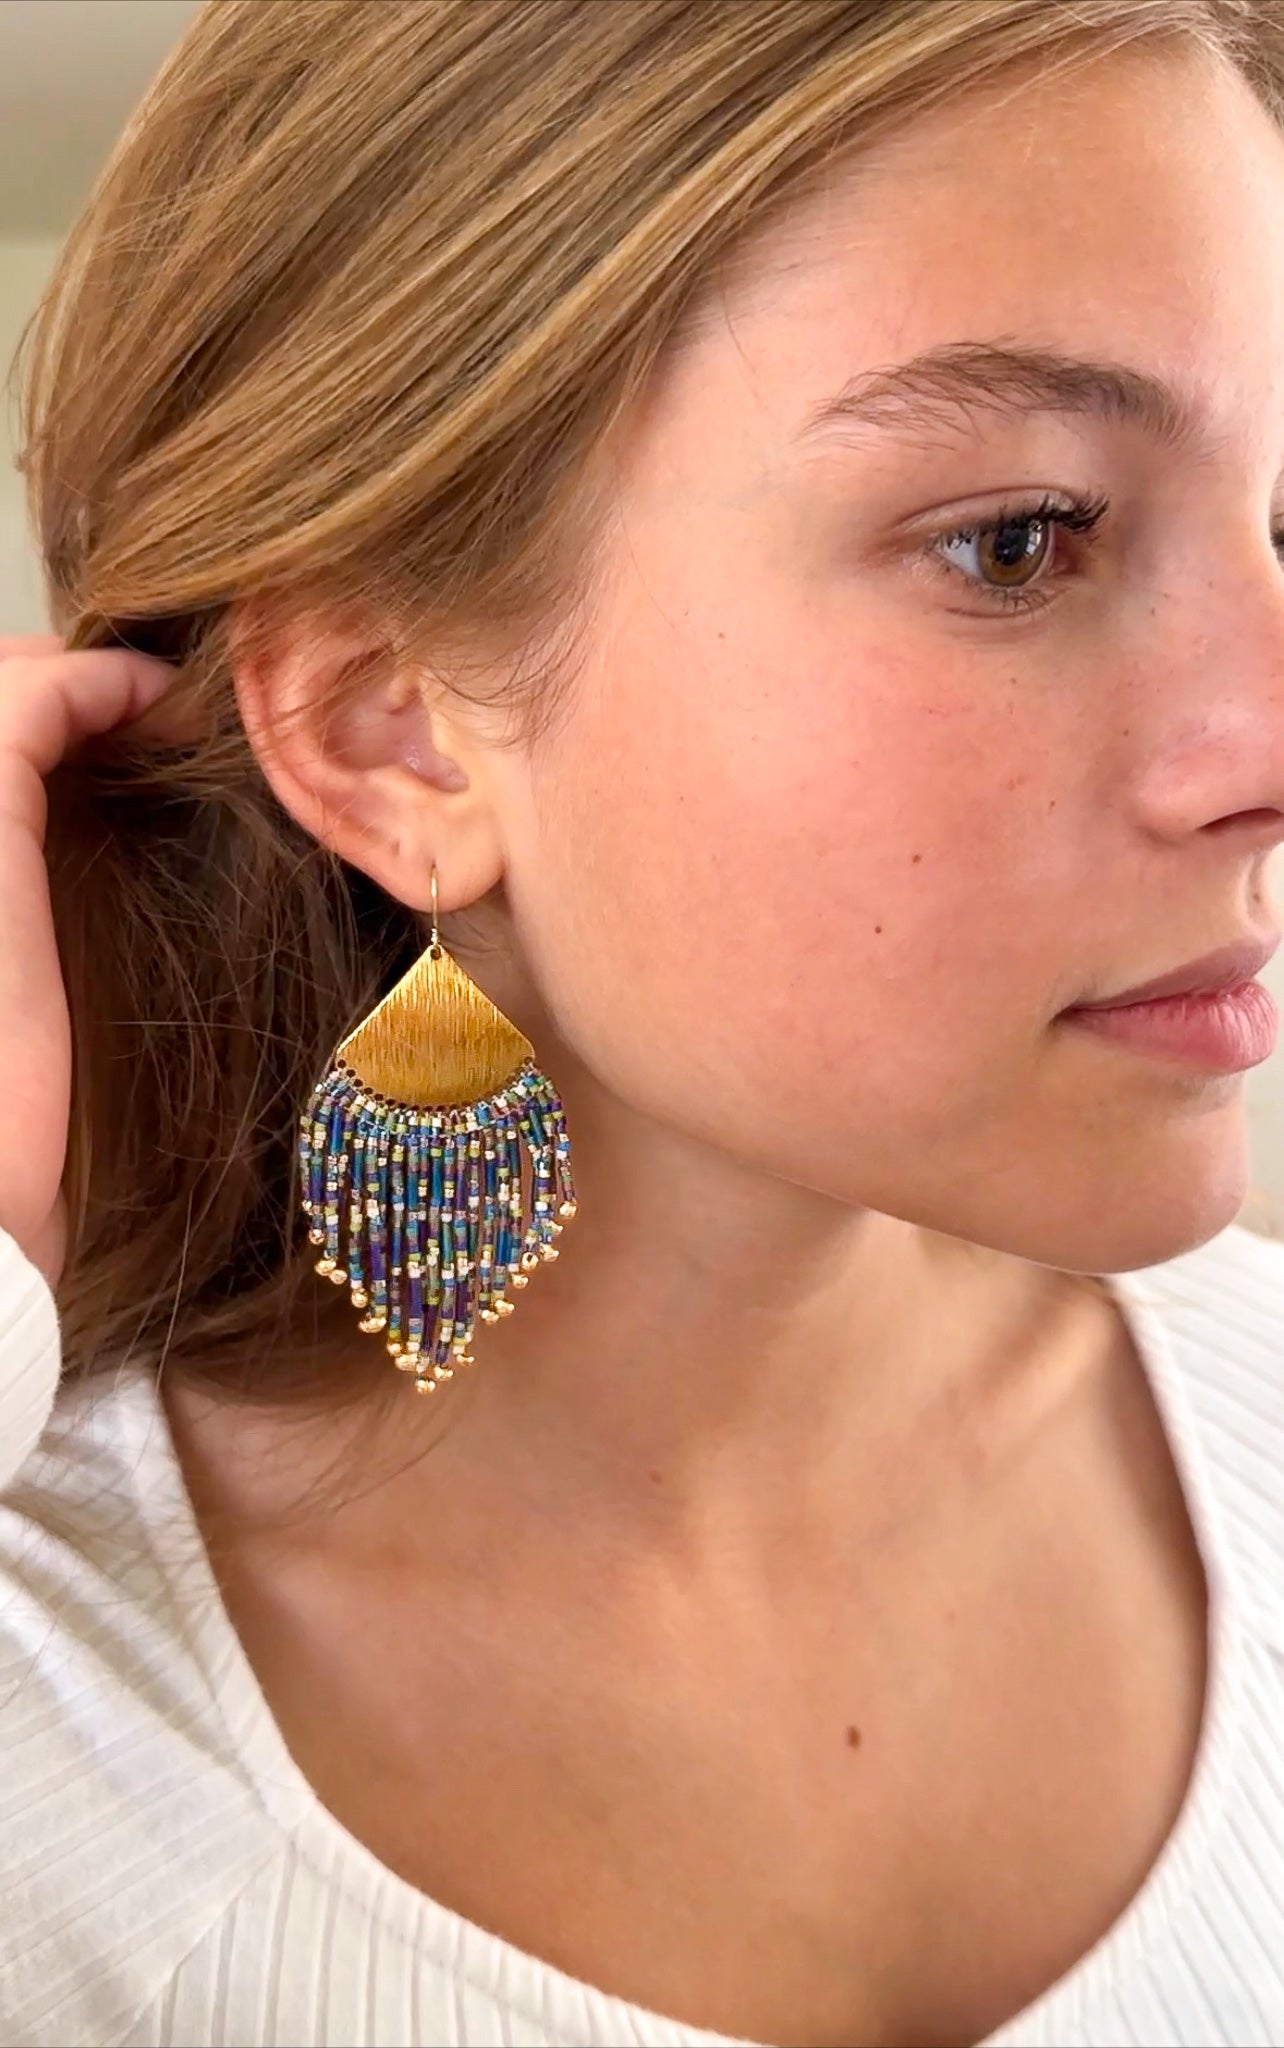 Woman wearing gold beaded fringe earrings with multi colored beads.